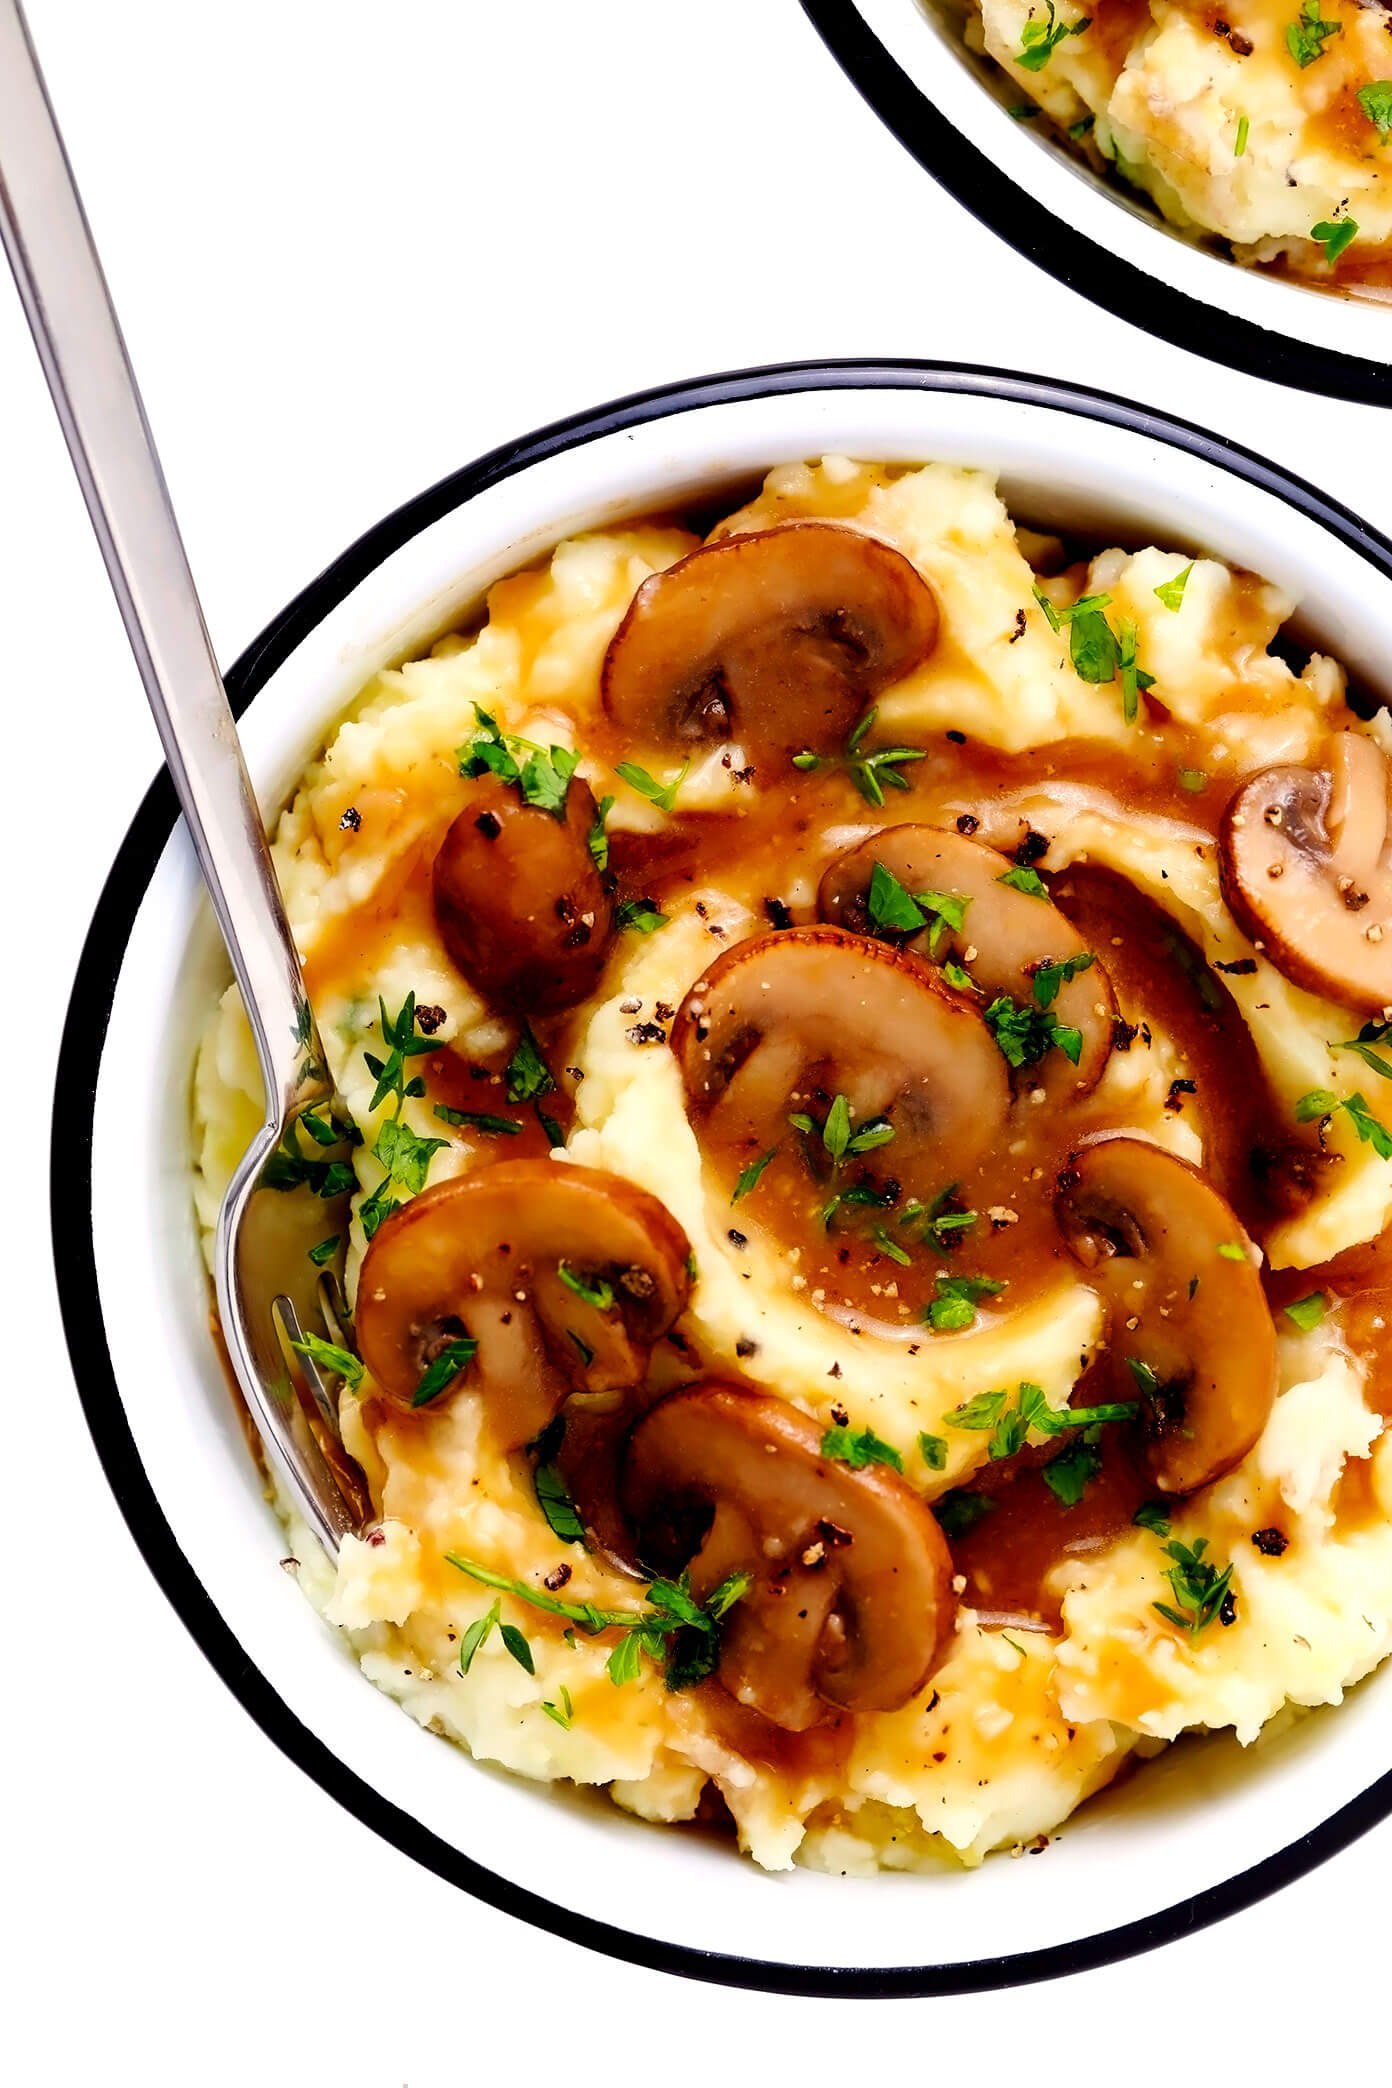 Instant Pot Mashed Potatoes in Bowls with Mushroom Gravy